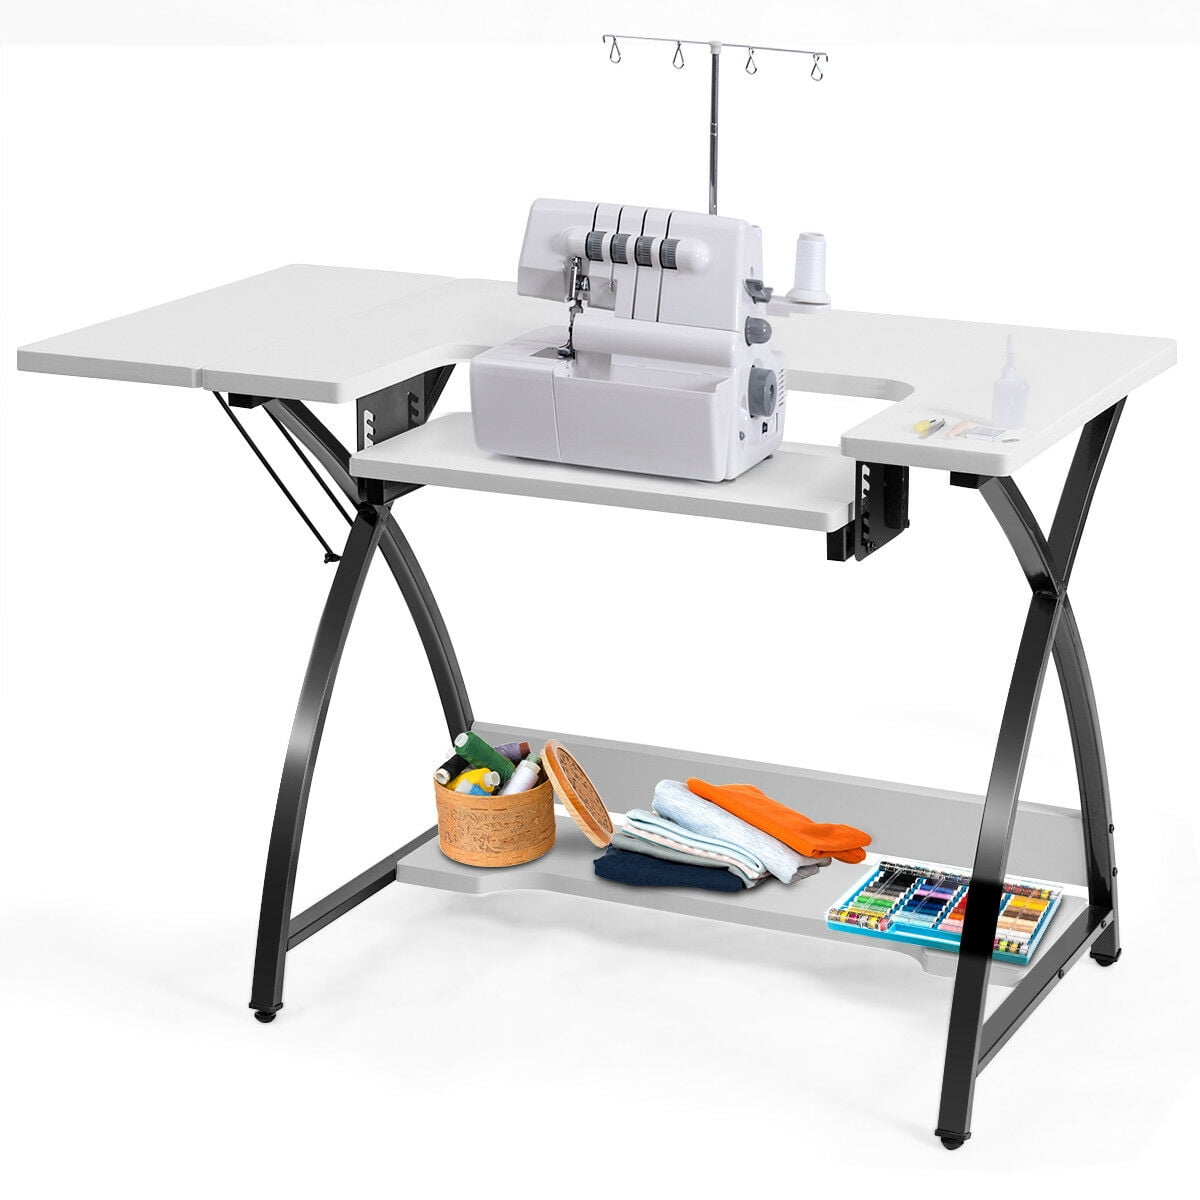 Specialized Sewing Machine Shelf Adjustable Height 46-Inch Sewing Craft Table Ideal for Home Indoor Use Enlarged Cutting Space Sturdy Multifunctional Computer Desk with Storage 